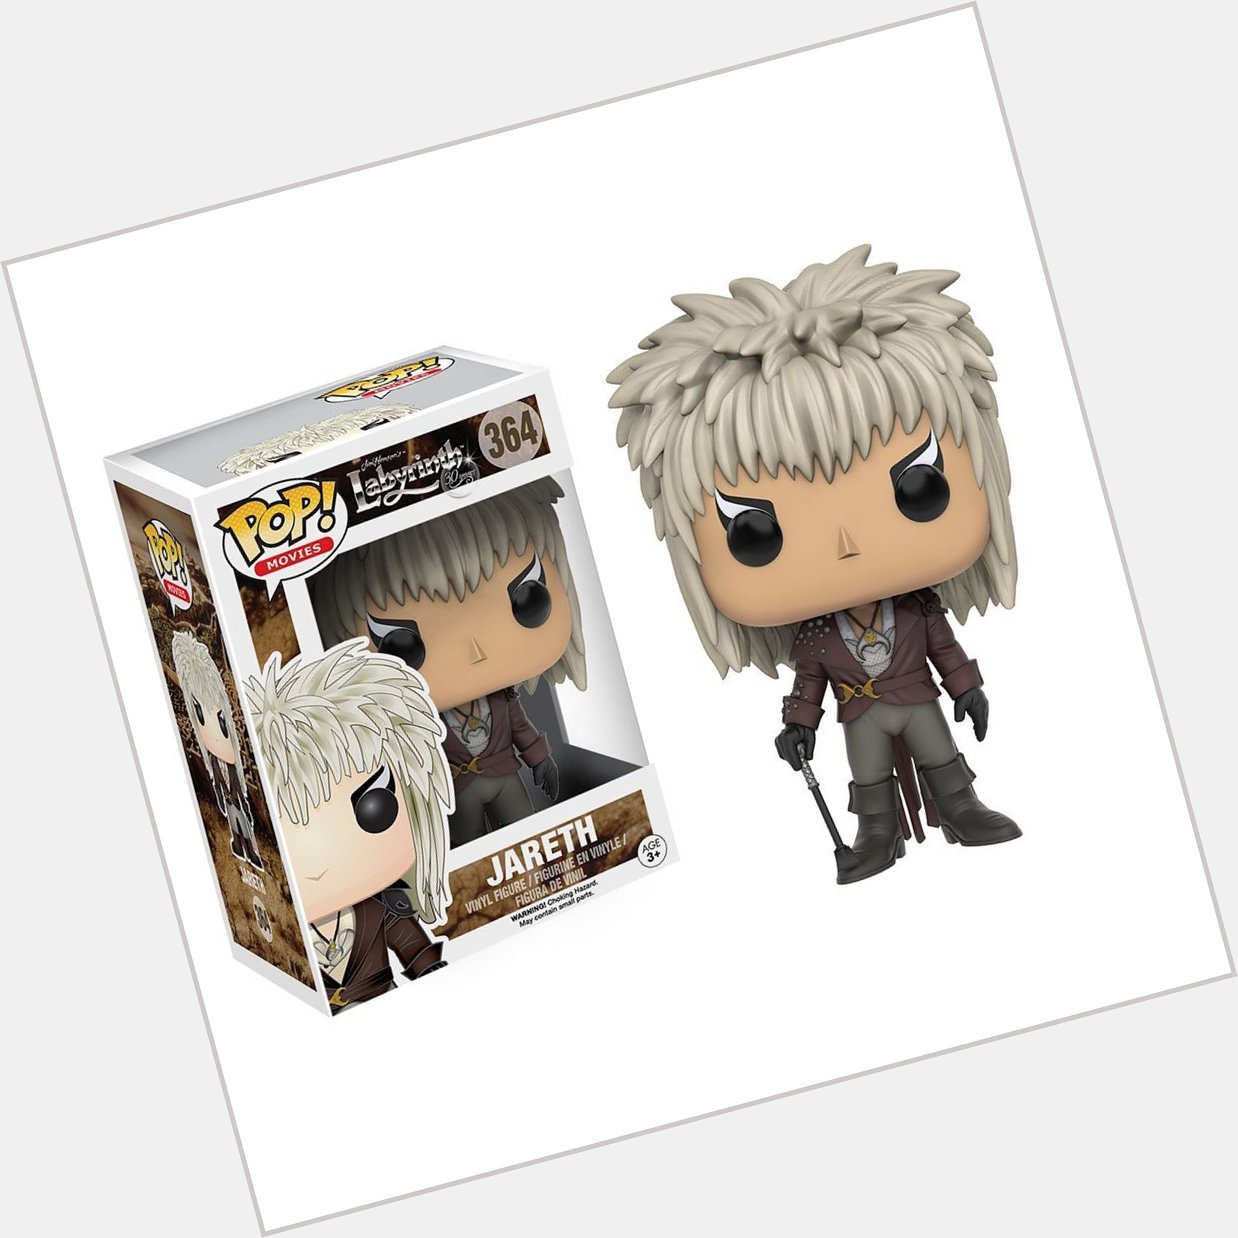 & follow for the chance to win a Jareth Pop! Happy Birthday, David Bowie! 